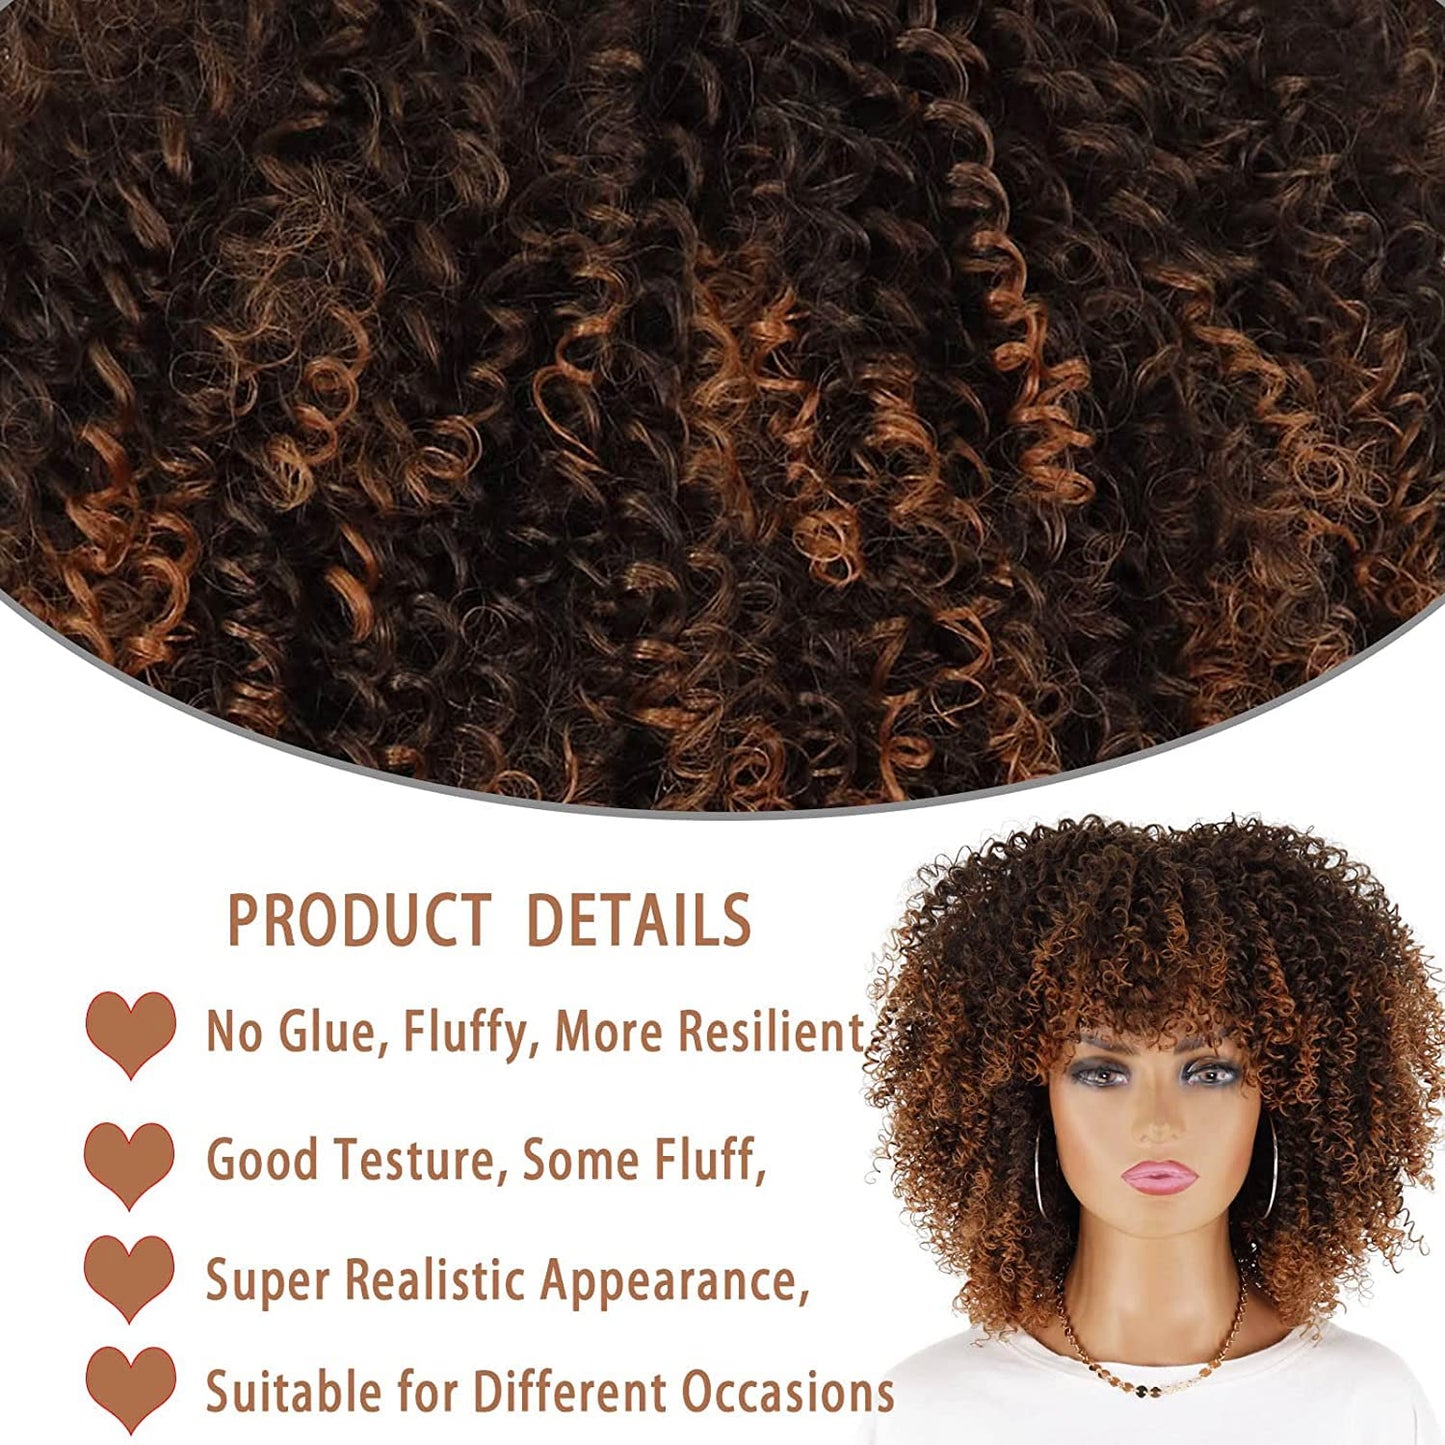 LINGHANG Short Curly Afro Wigs with Bangs, Brown Afro Kinky Curly Wigs for Black Women Synthetic Heat Resistant Fluffy Brown Wigs (Ombre Brown)